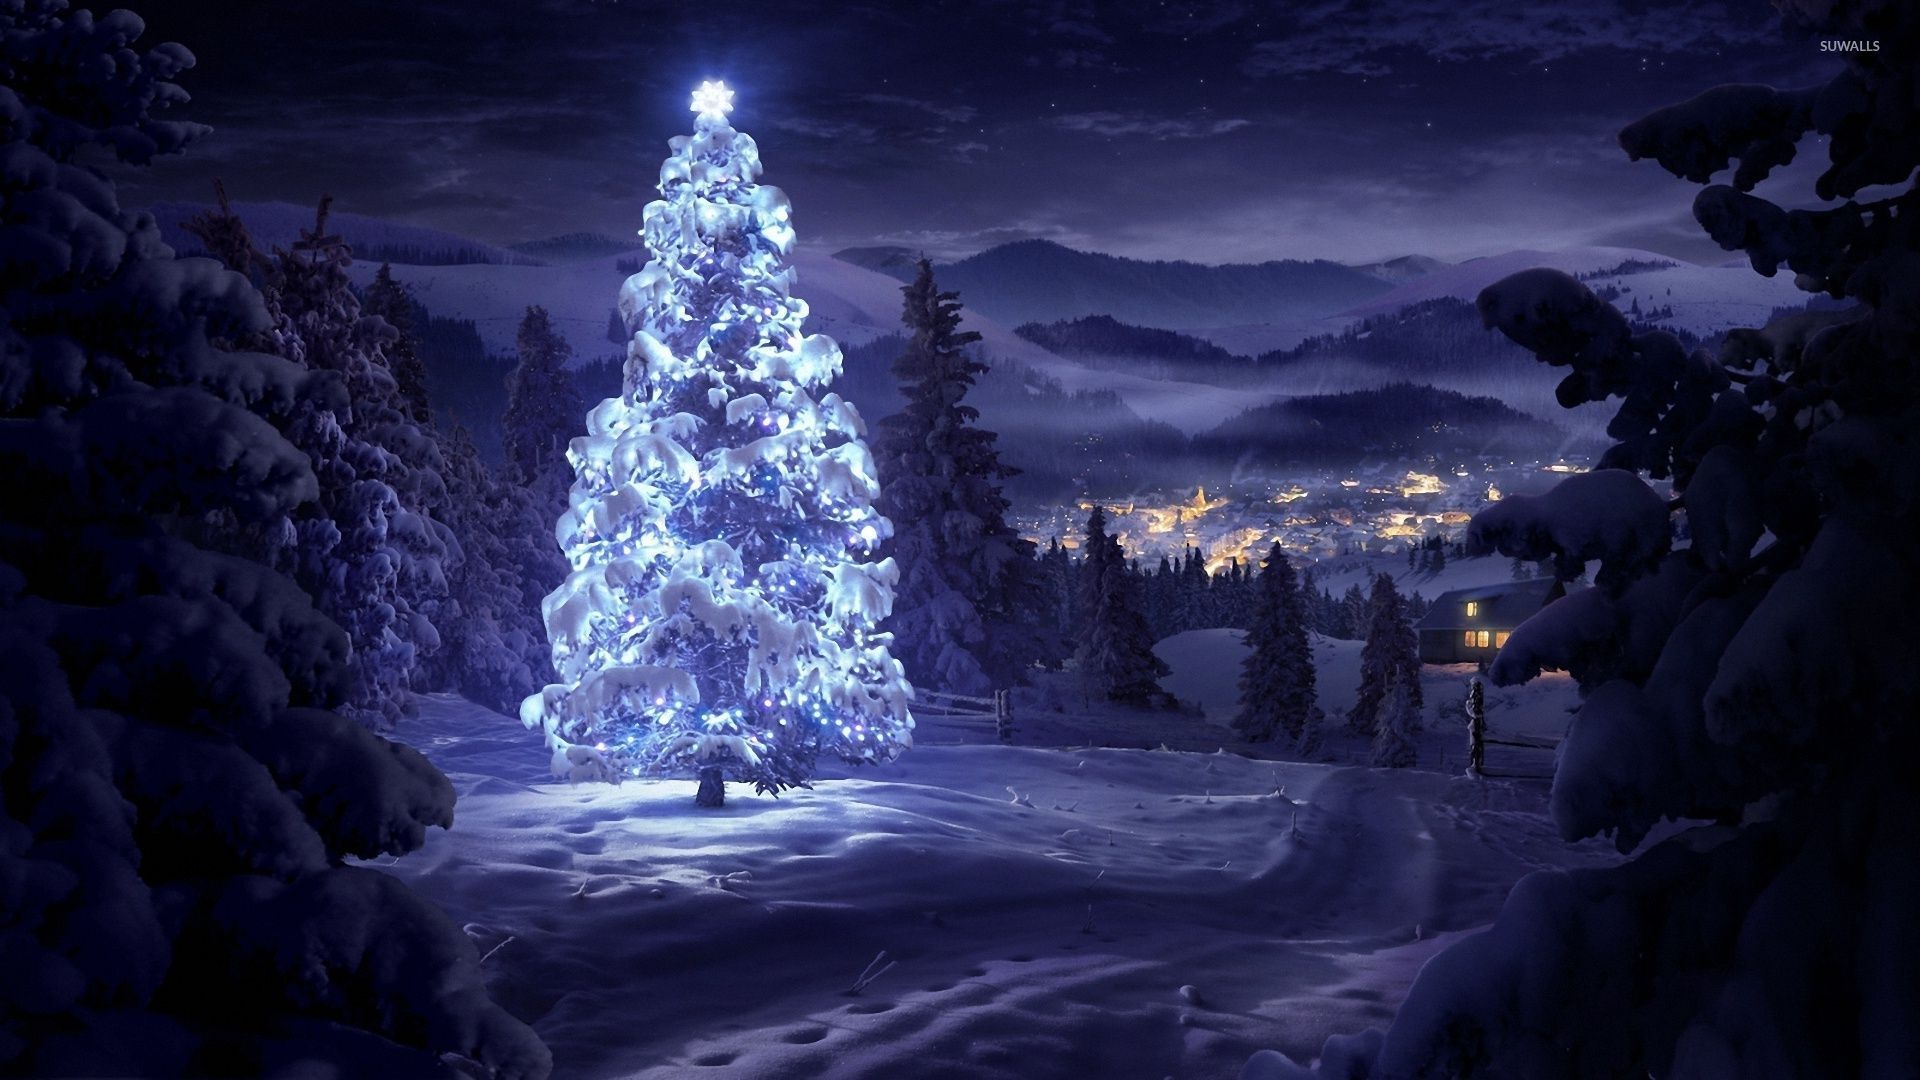 Bright star on top of a beautiful snowy tree in the forest wallpaper wallpaper